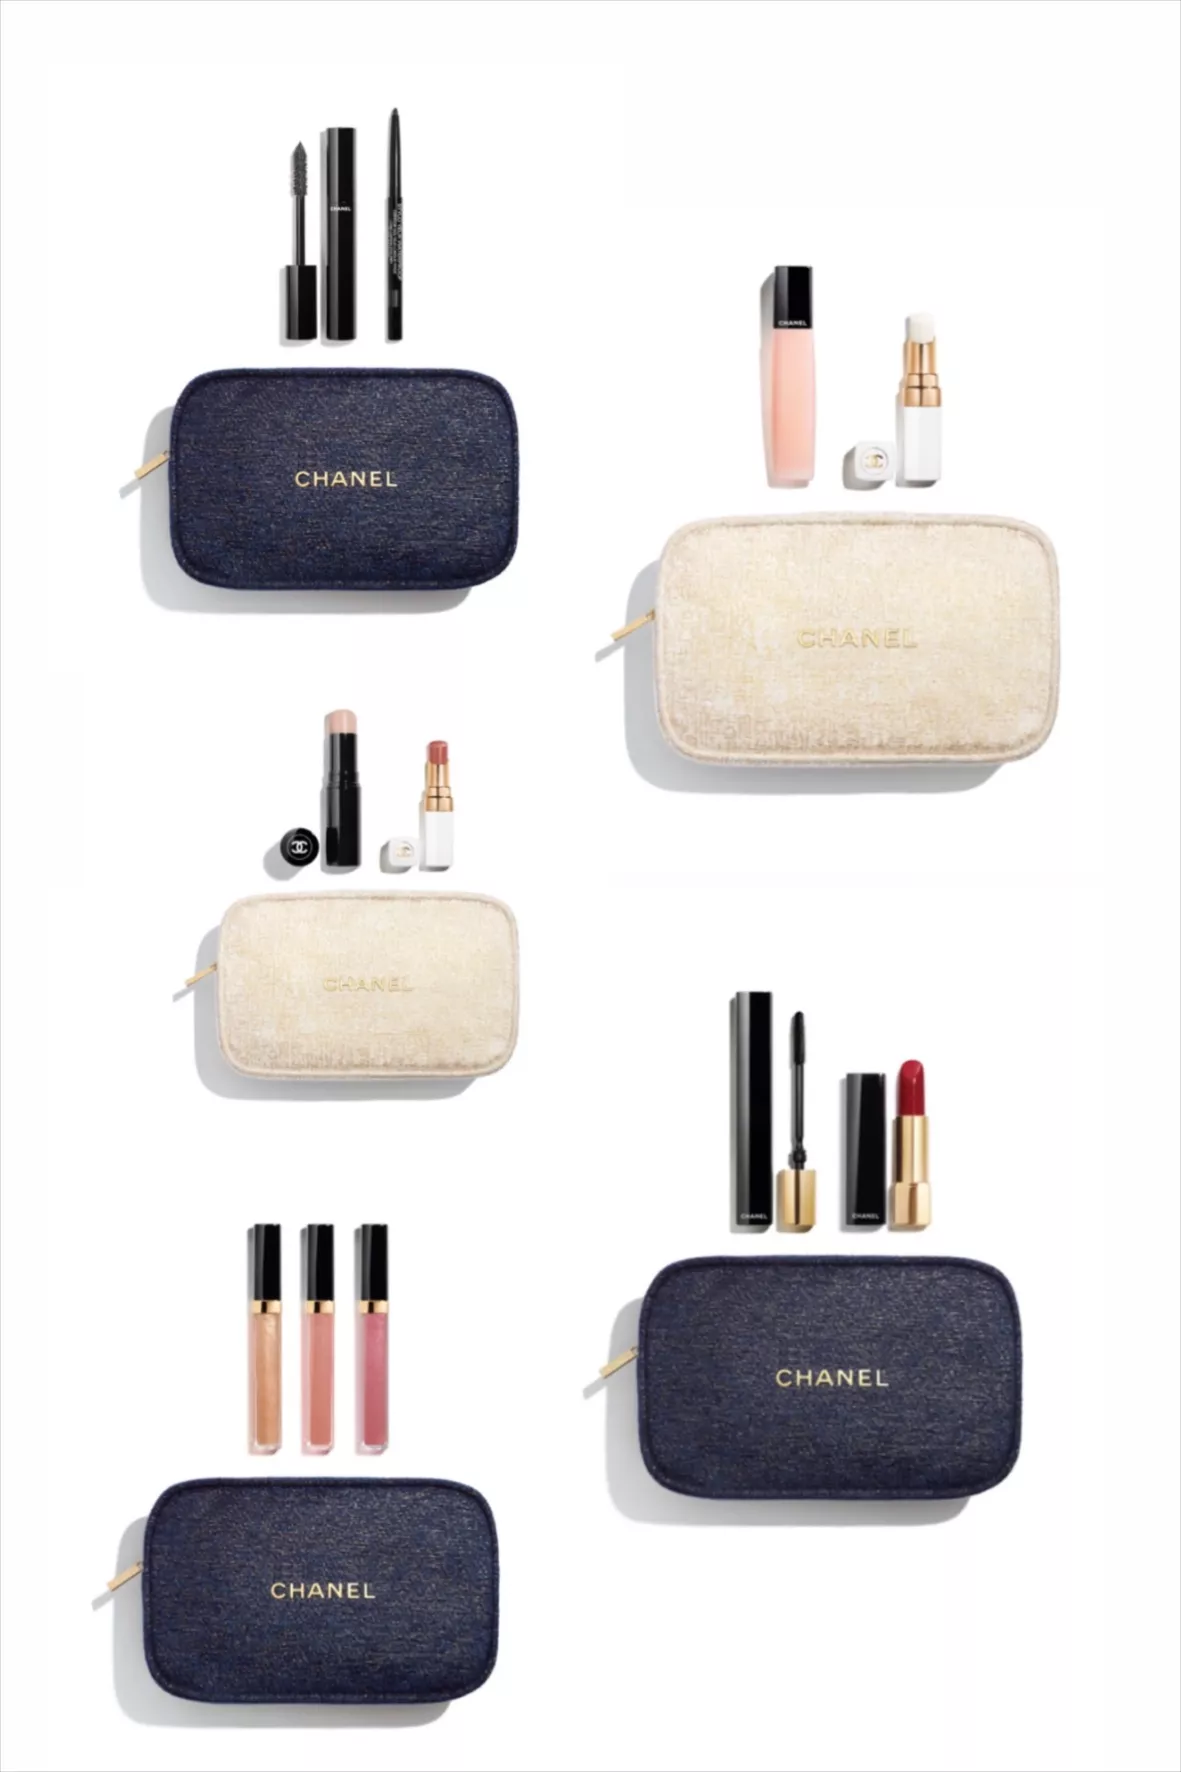 Chanel Makeup & Beauty Holiday Gift Sets  Chanel makeup bag, Chanel makeup,  Chanel gift sets